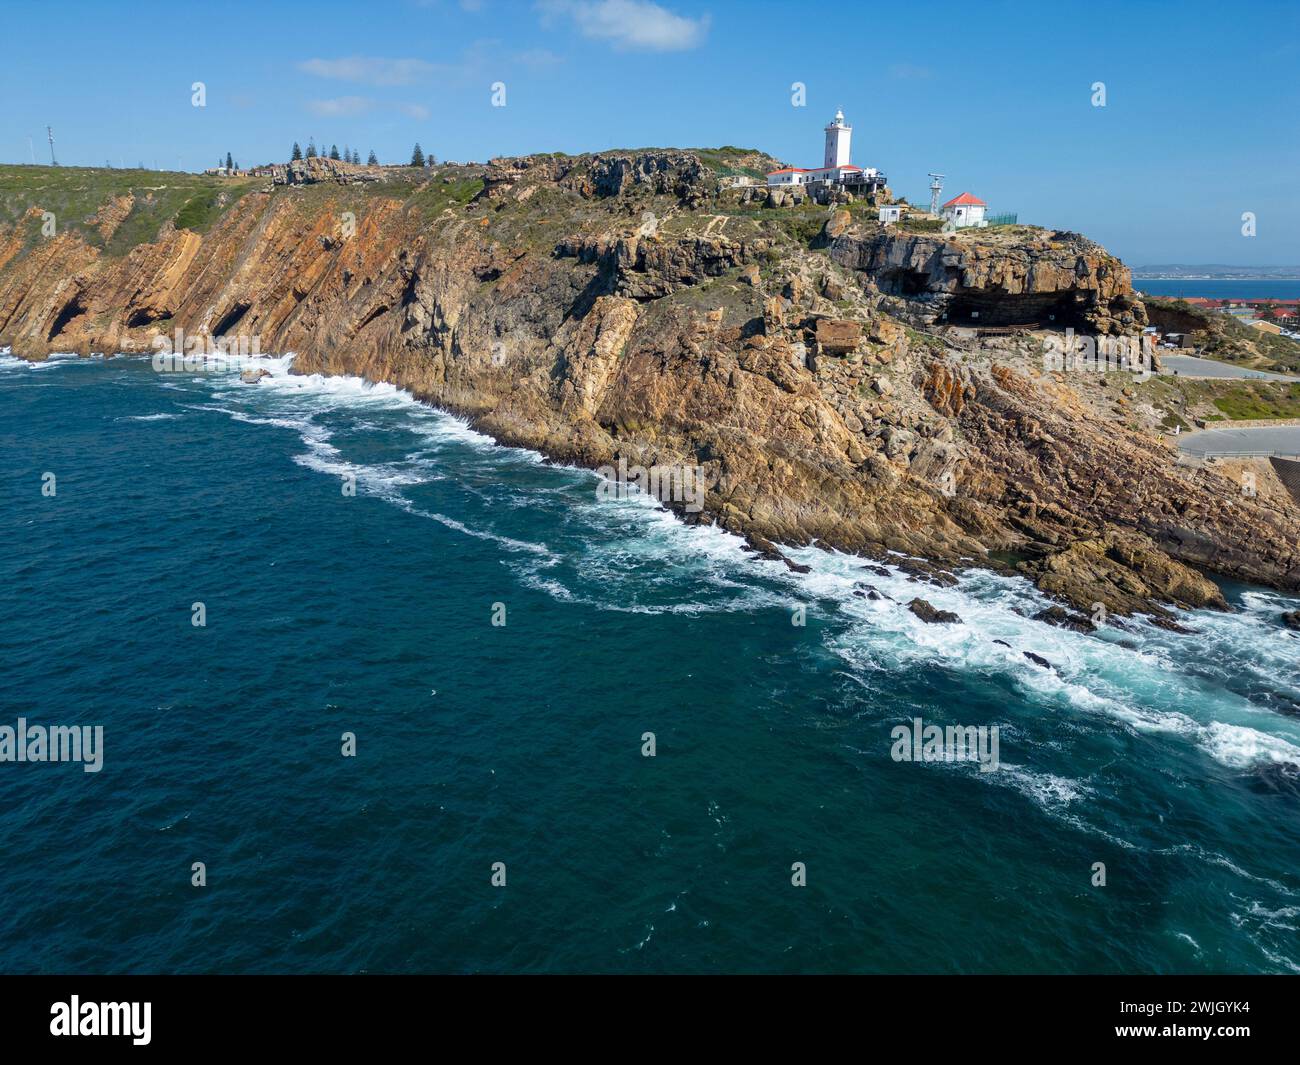 Cape St Blaize Lighthouse, Mossel Bay, Western Cape Province, Garden Route, South Africa Stock Photo